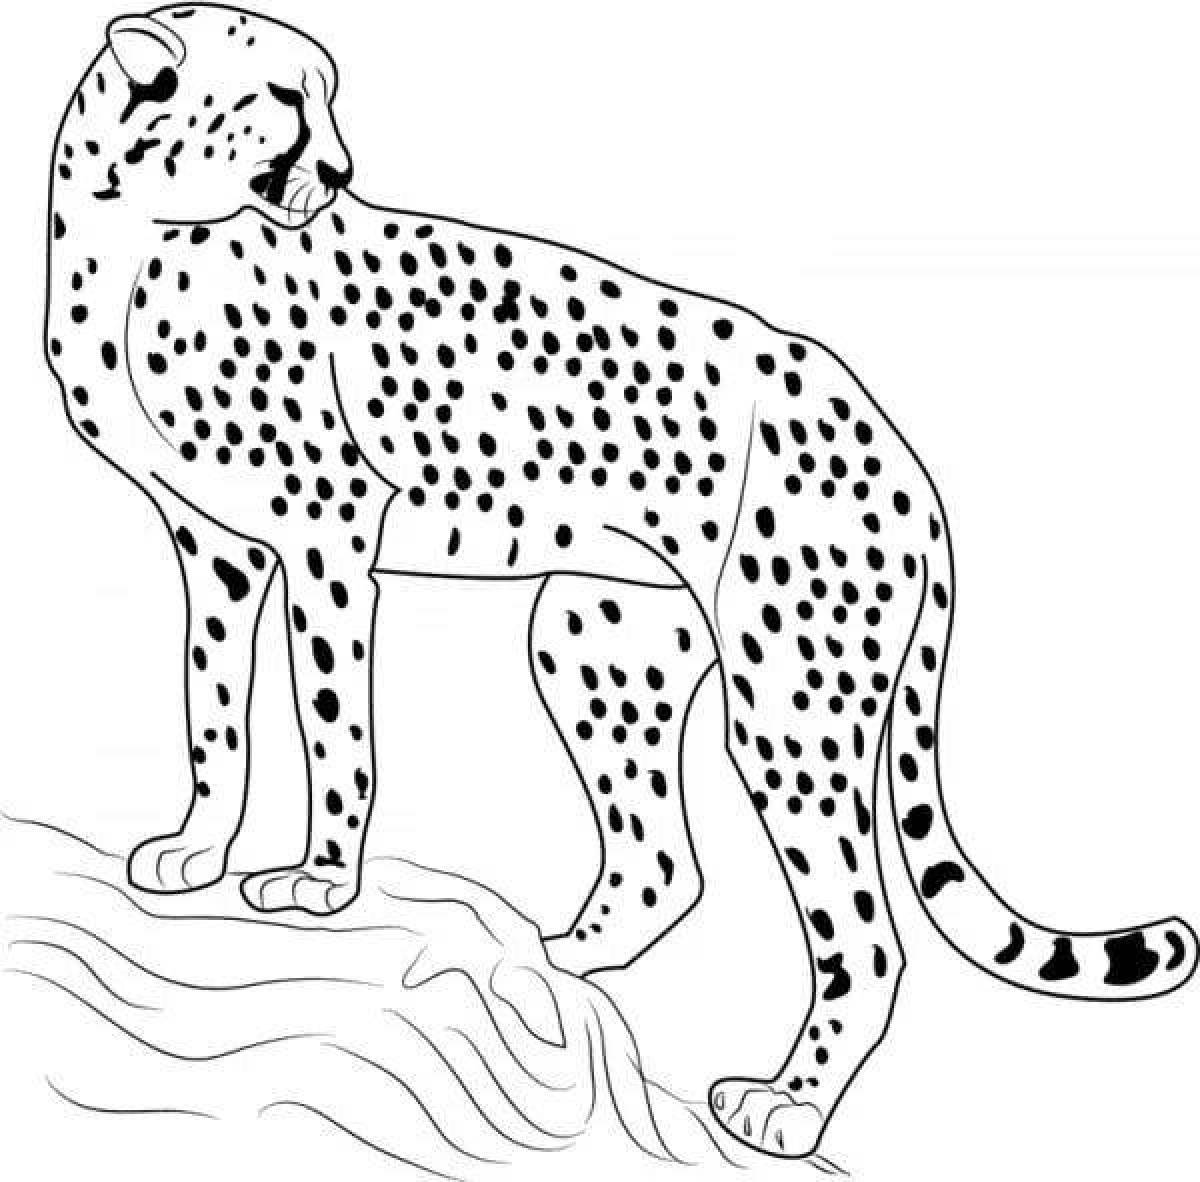 Gorgeous cheetah coloring book for kids